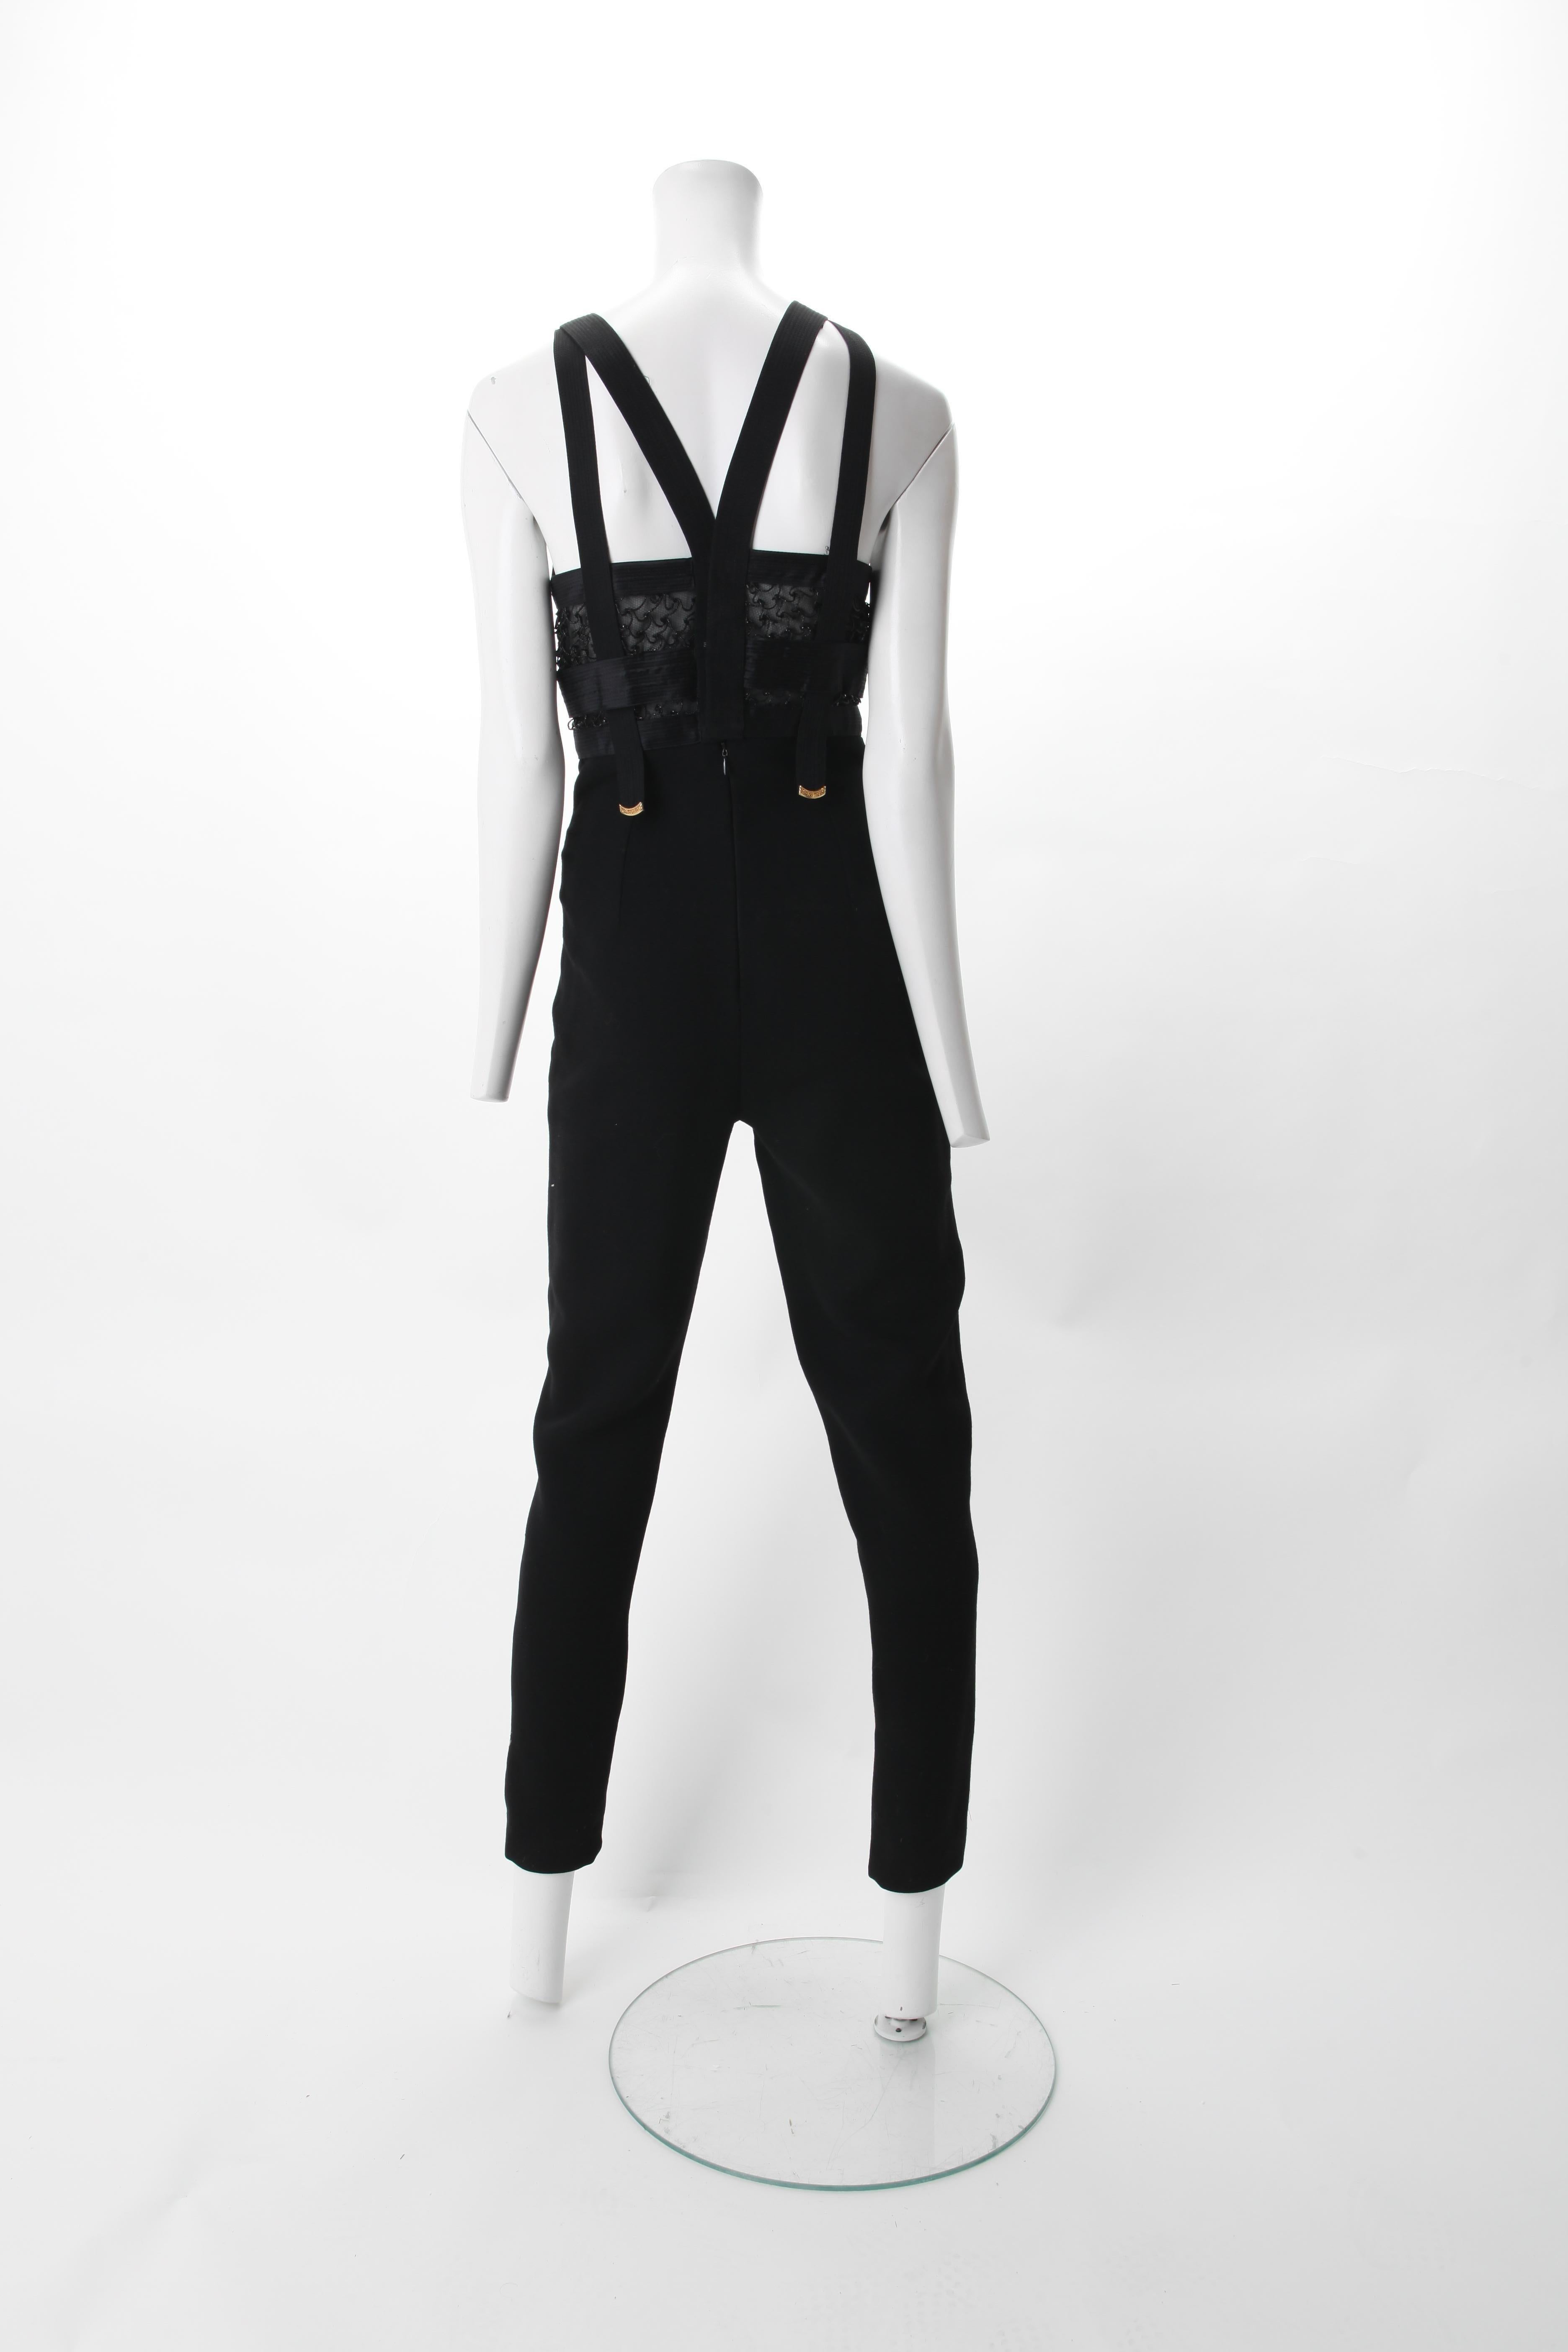 1992 Gianni Versace Bondage Black Wool Jumpsuit with Medallions For Sale at  1stDibs | versace black jumpsuit, versace jumpsuit, black versace jumpsuit